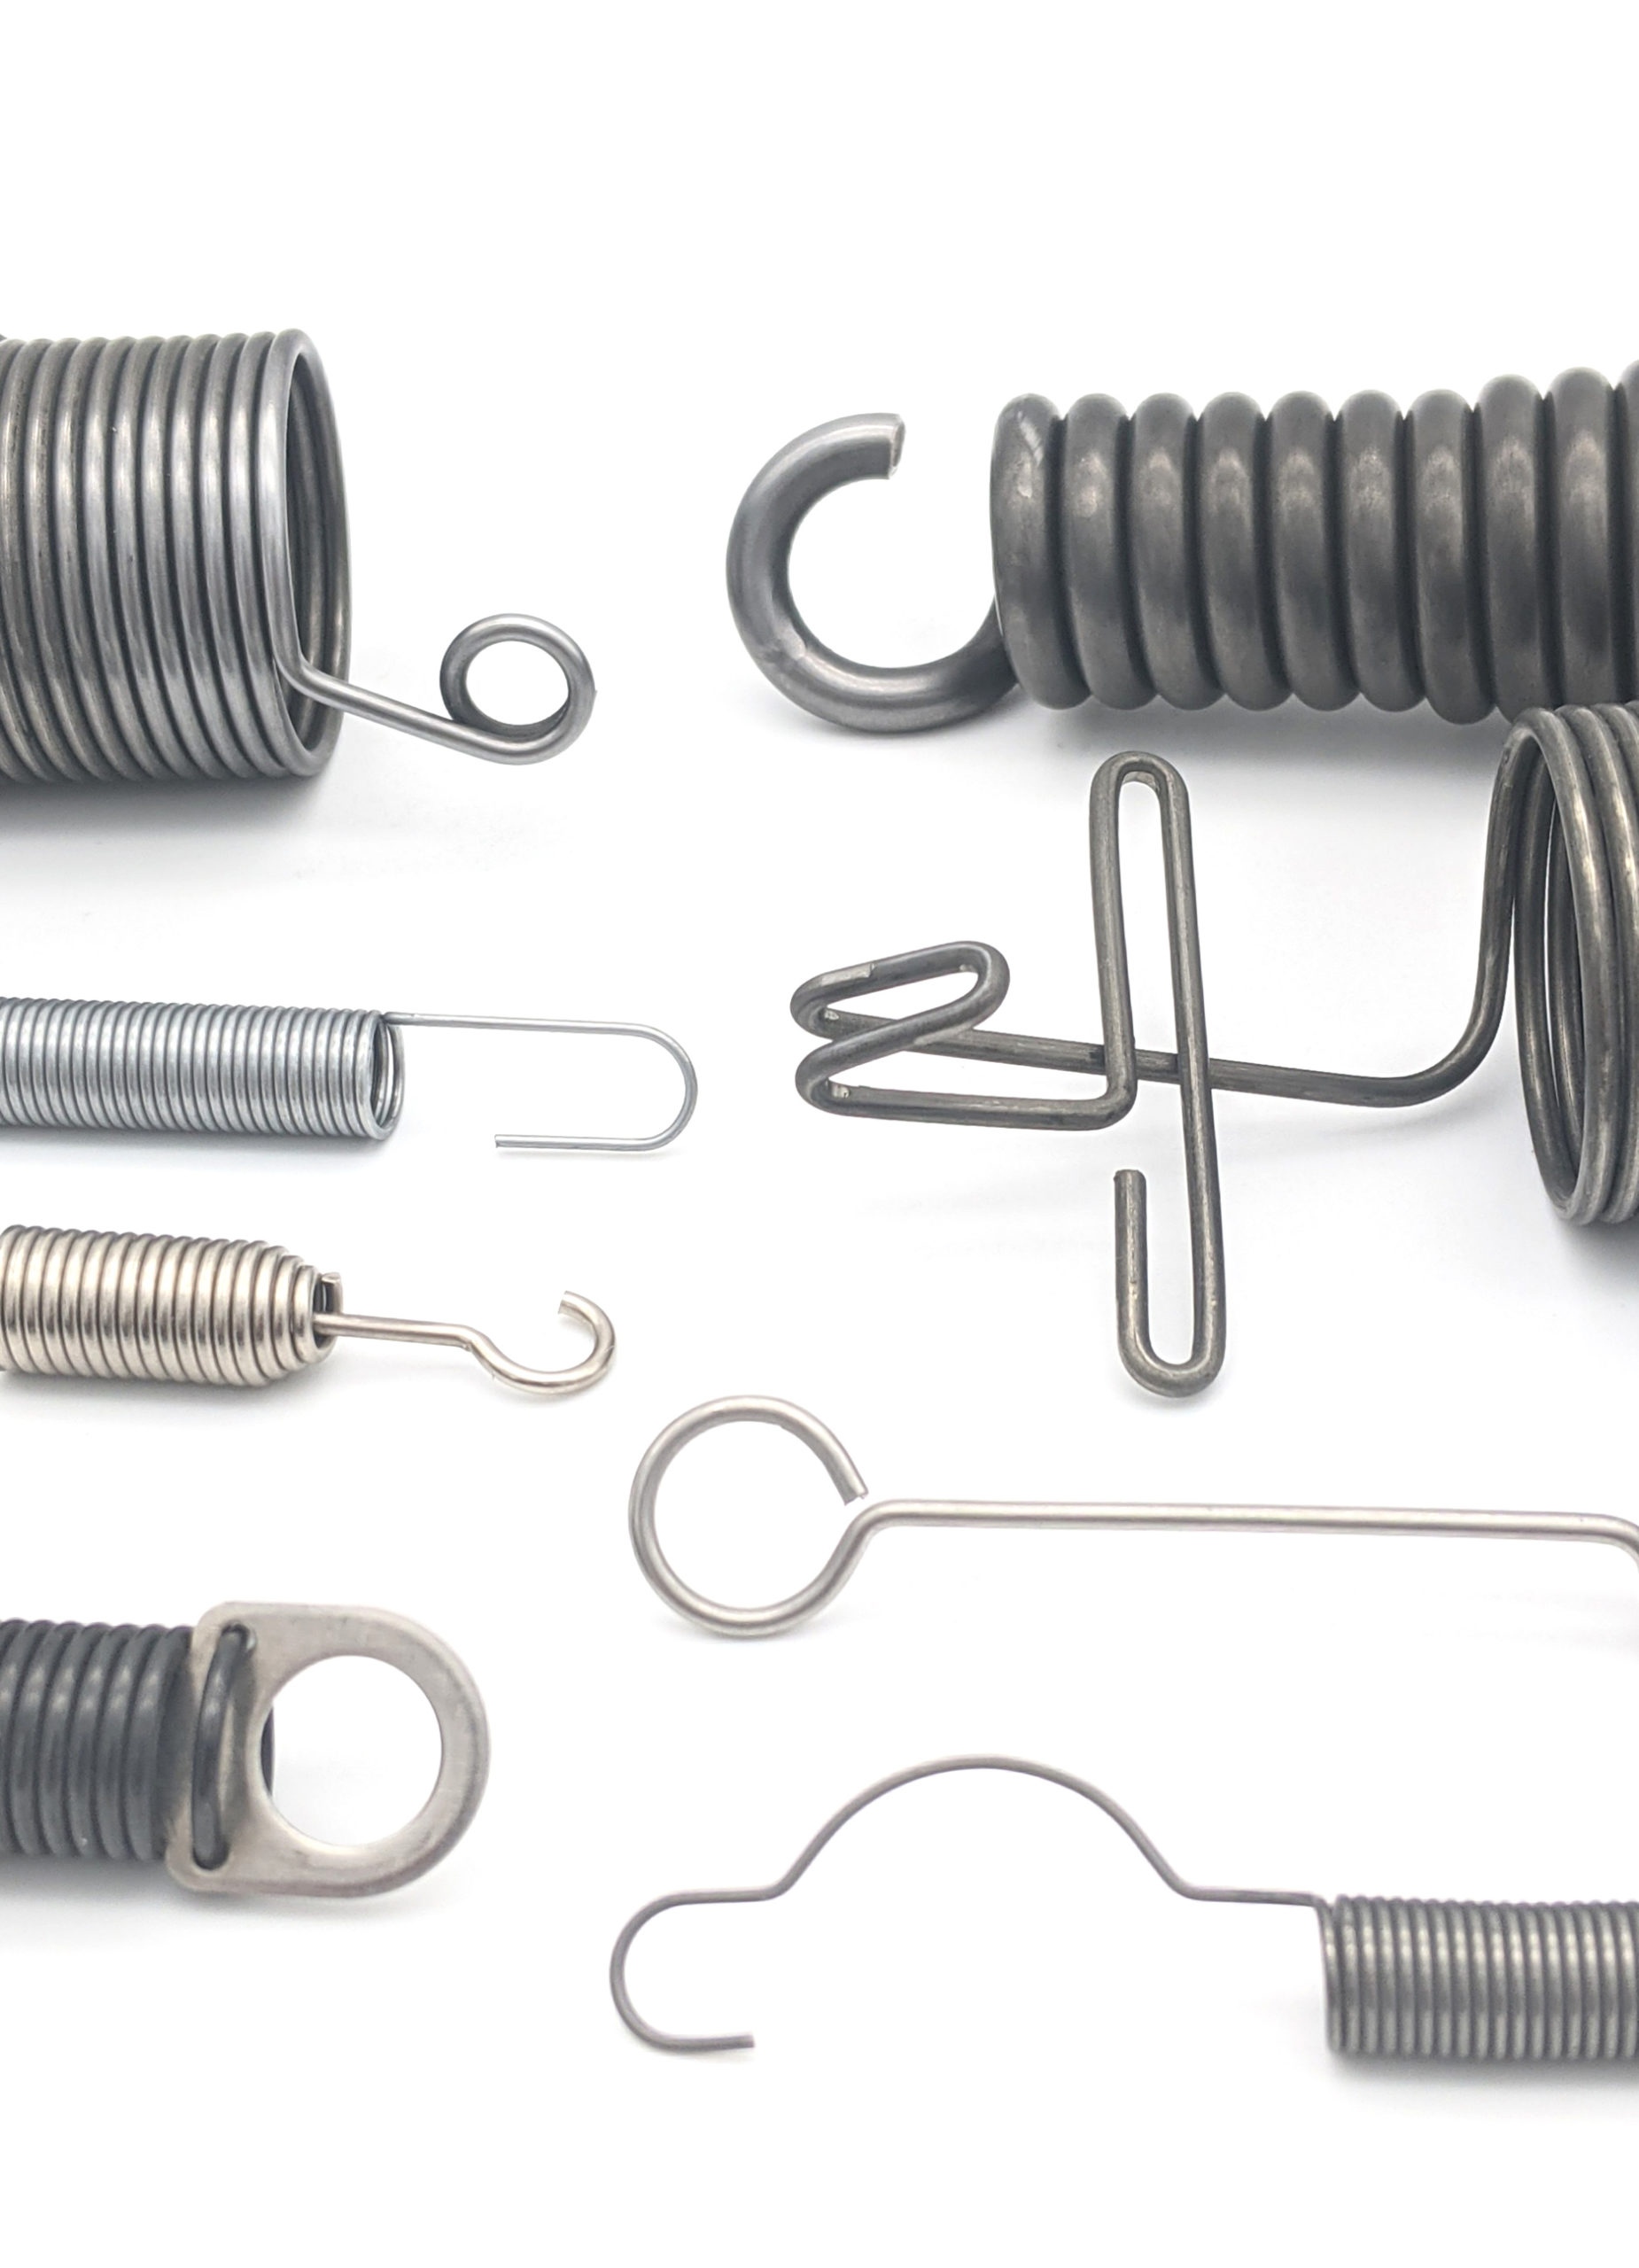 Expansion Tension Spring For Closing The Door 304 Stainless Extension Springs